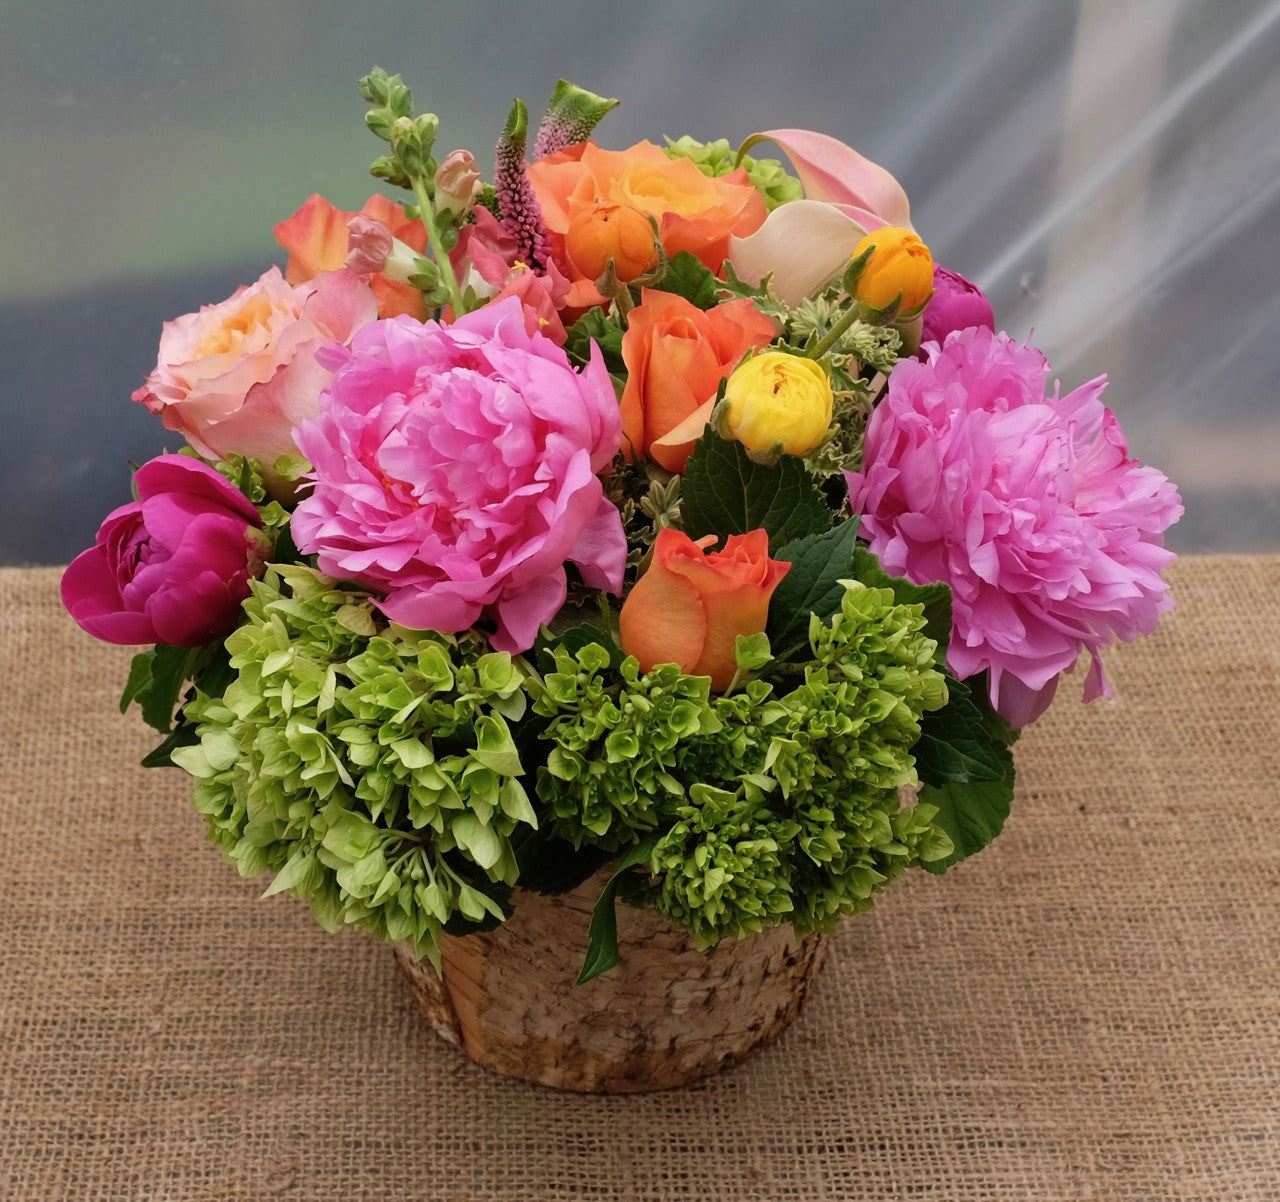 Sebastian Flower Arrangement: Designed in a birch container with Peonies, Roses, Hydrangea. Designed by Michler's Florist in Lexington, KY 